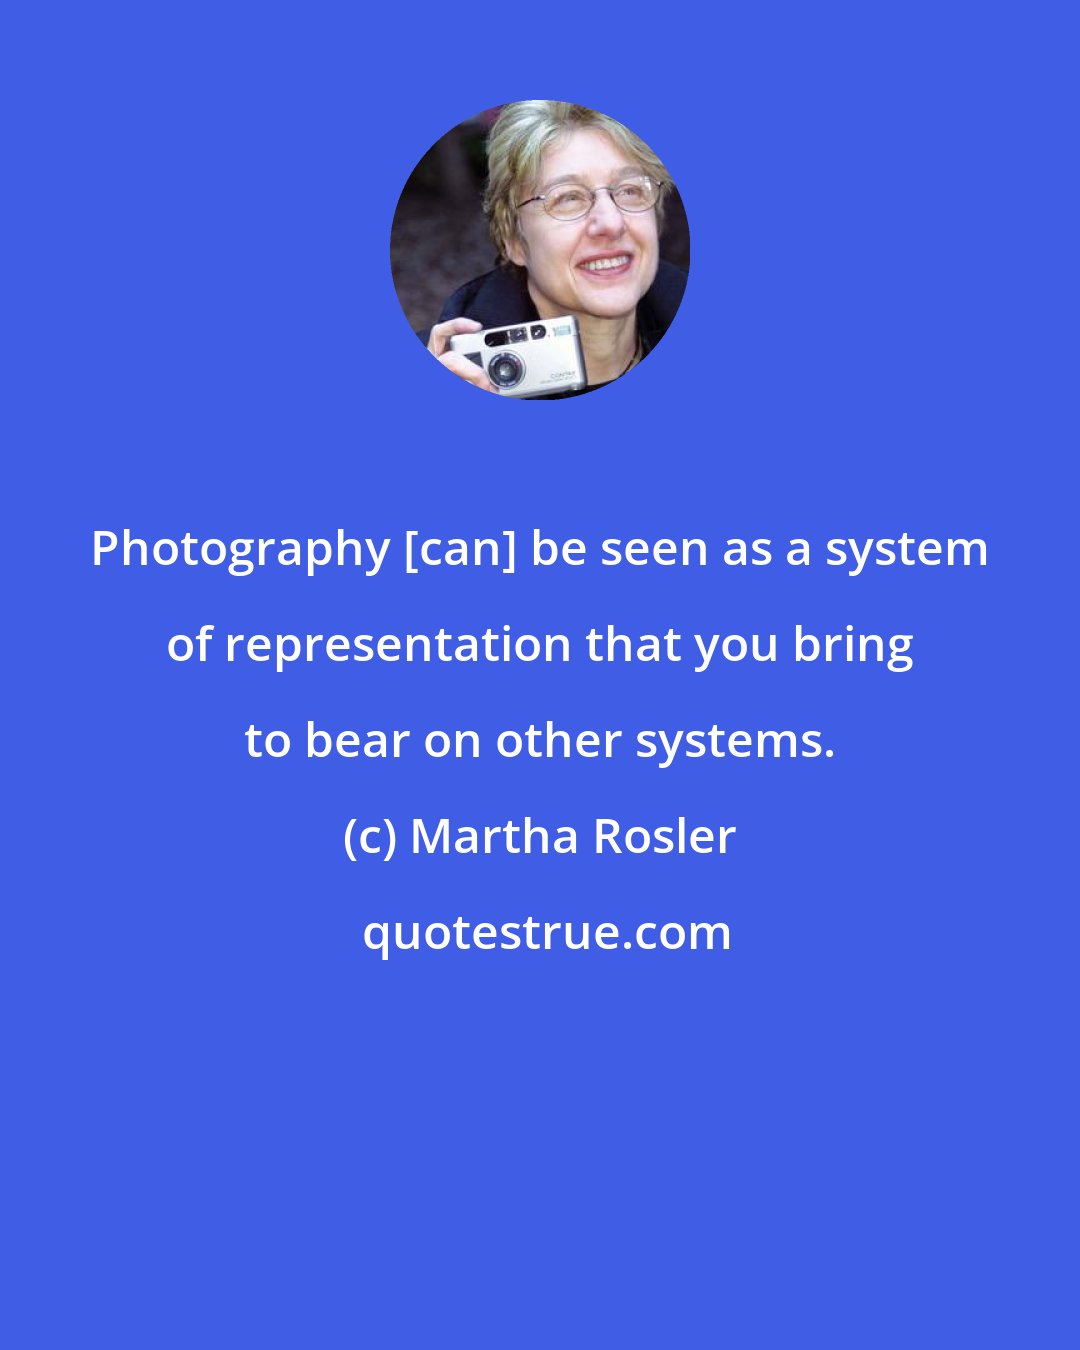 Martha Rosler: Photography [can] be seen as a system of representation that you bring to bear on other systems.